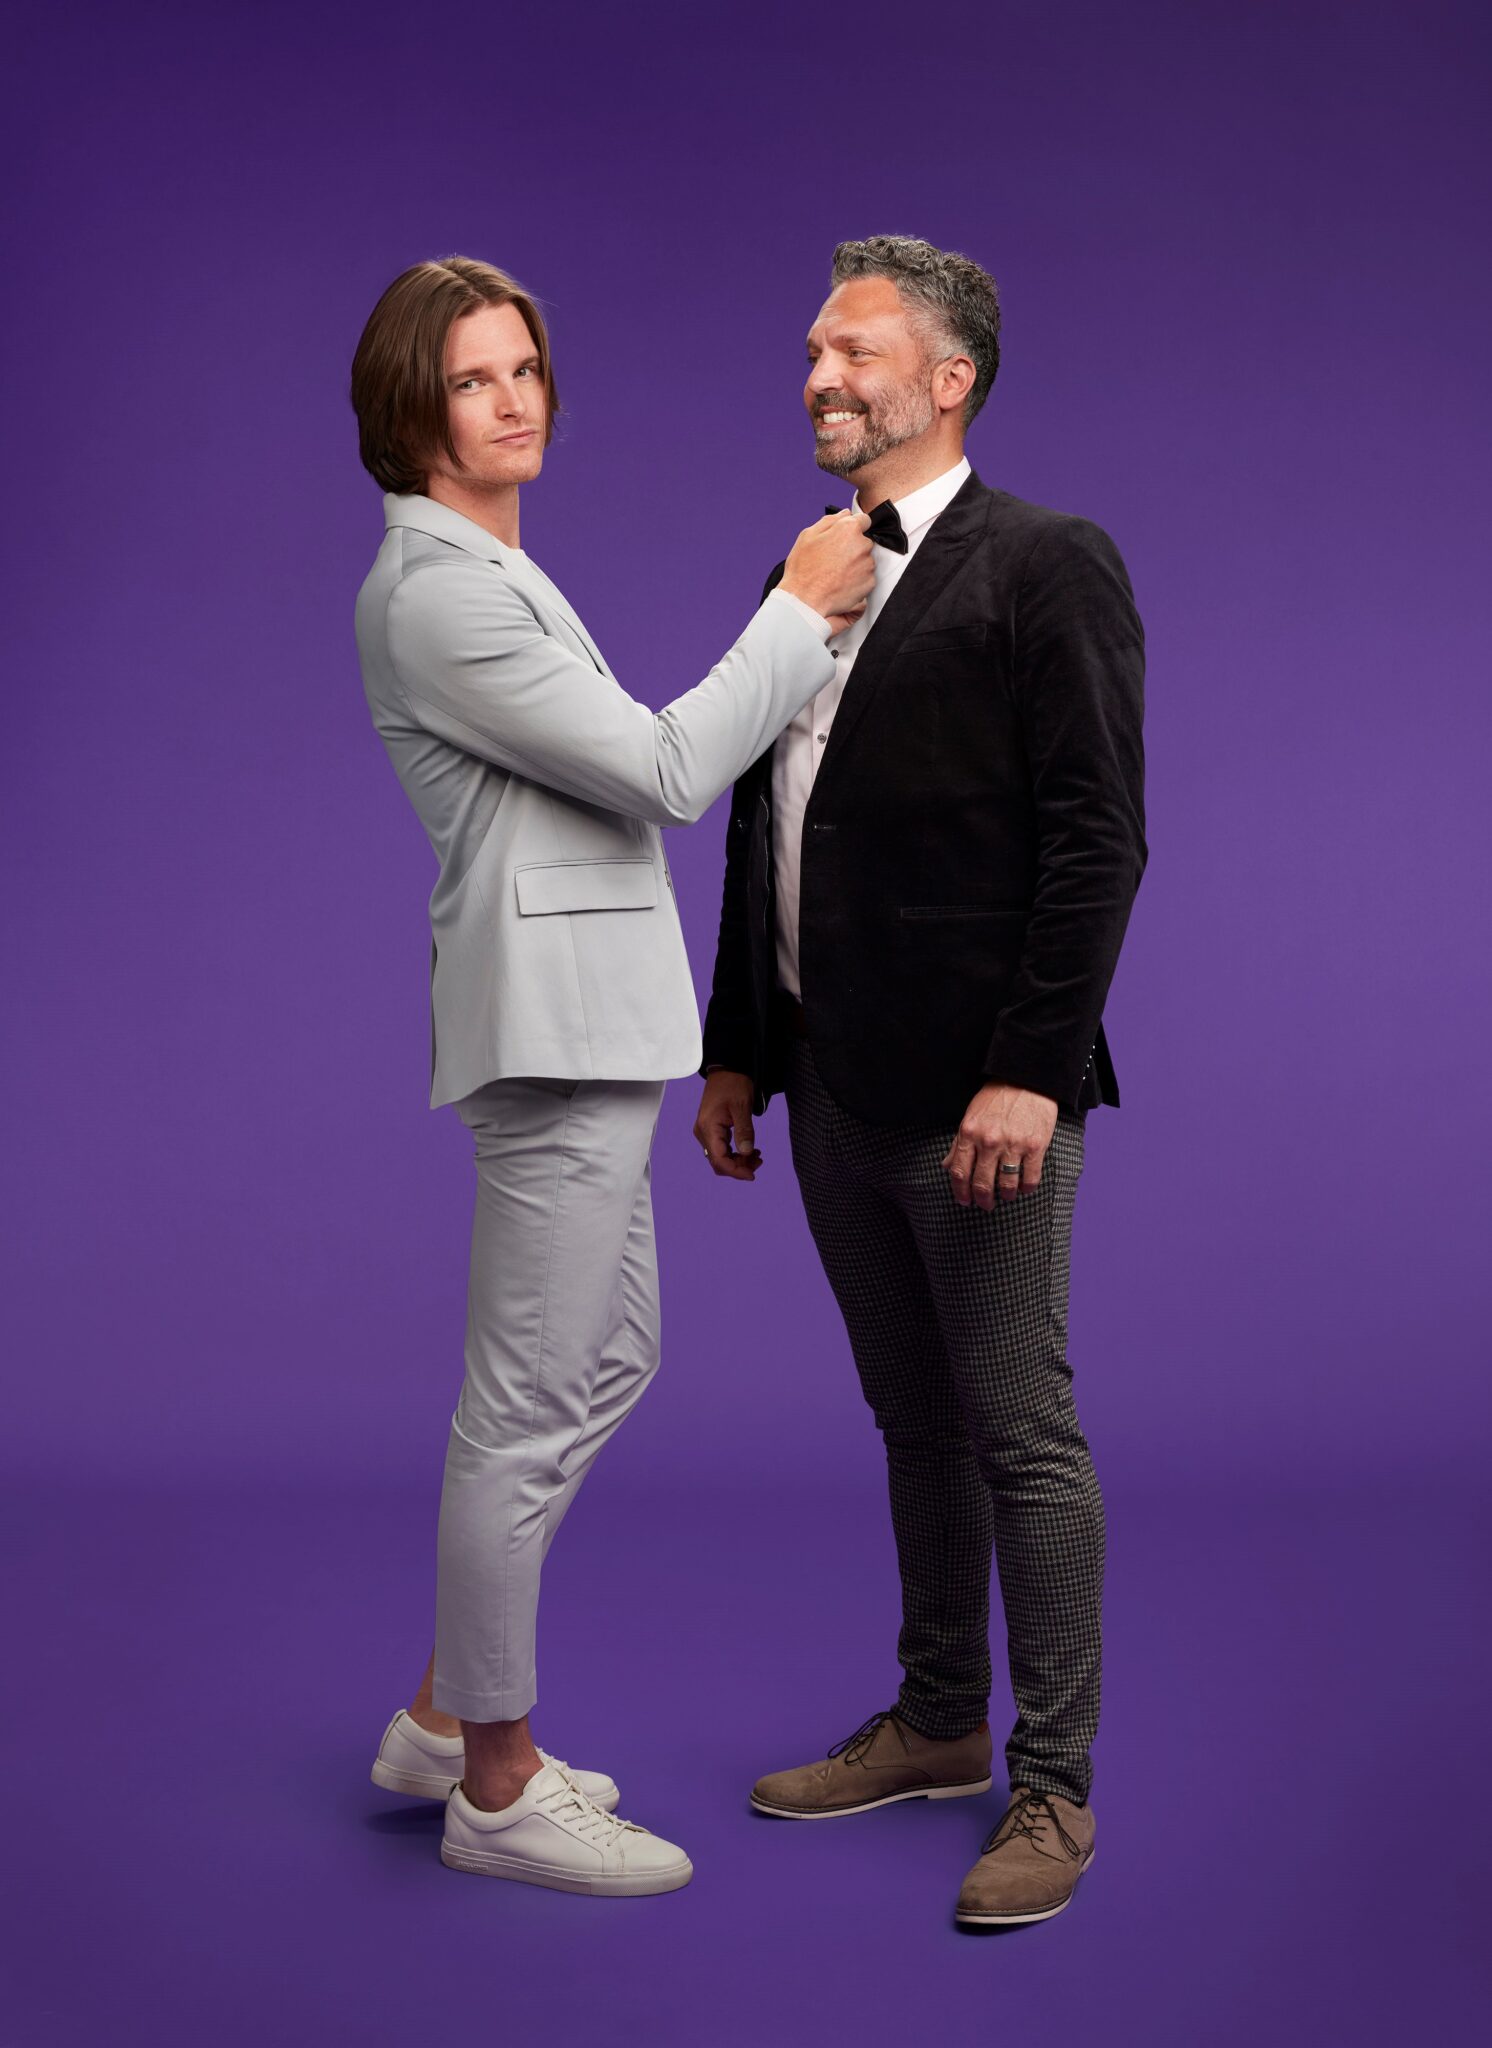 Daniel McKee (L) and Matthew Jameson (R) in a promotional image for Married at First Sight UK. 